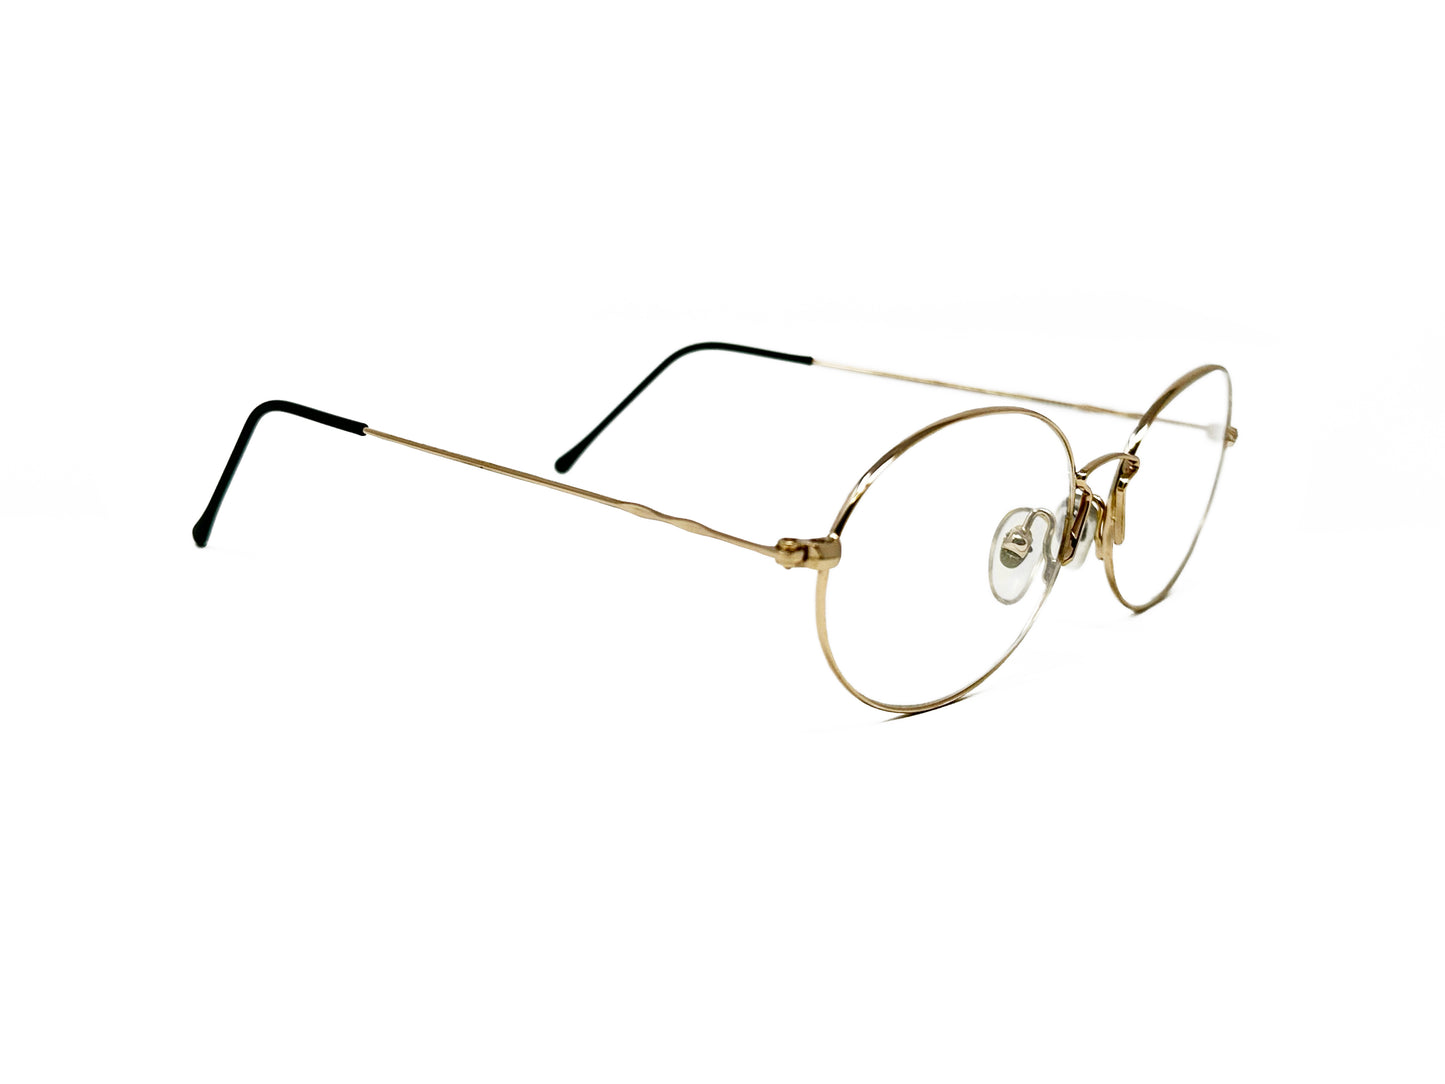 Fiorucci Occhiali oval, metal optical frame. Model: M24. Color: 1 - White gold. Side view.